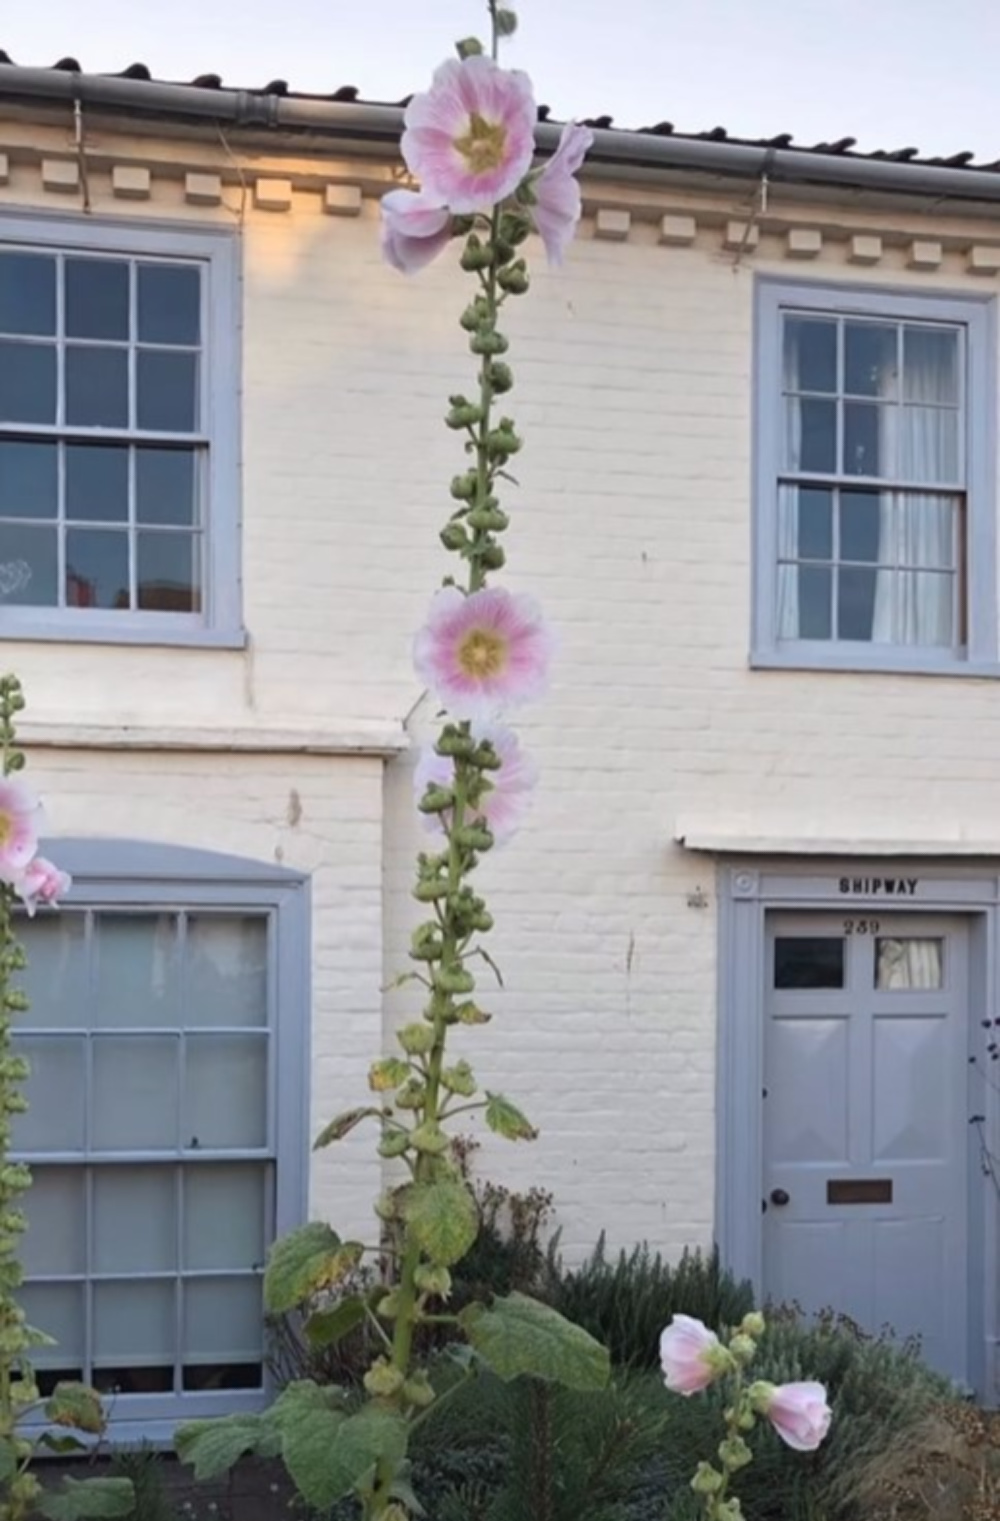 Beautiful blue grey painted trim and door on a white painted brick English country house - Rachel Ashwell Shabby Chic. #englishcountrygarden #englishcountryhouse